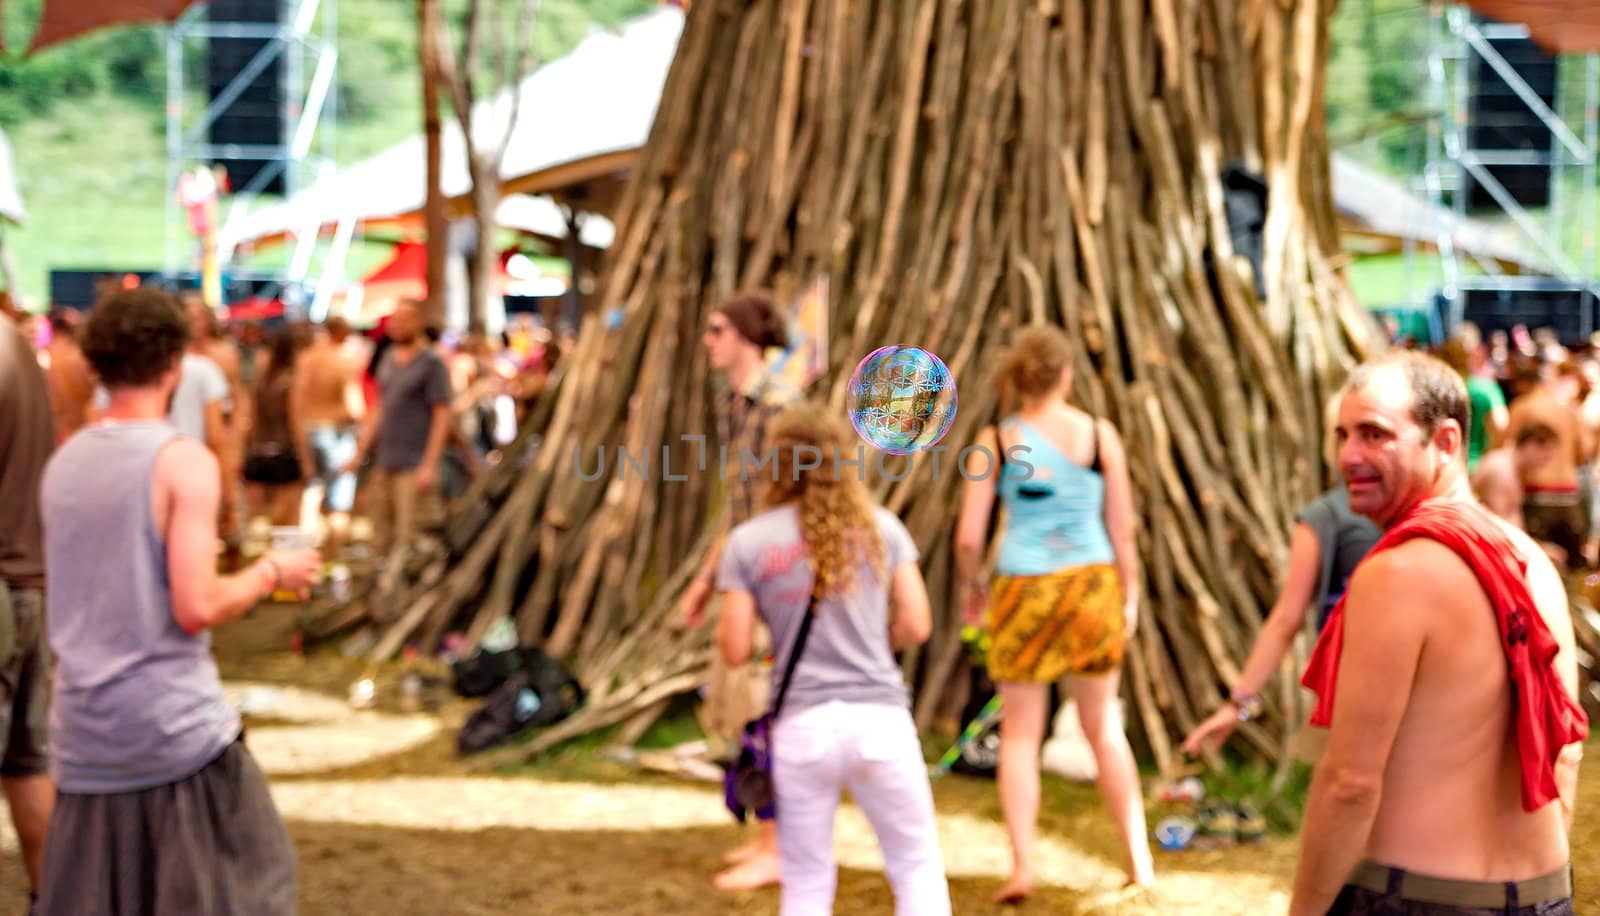 OZORA, HUNGARY - AUGUST 01: Man watching bubles on Ozora Festival, one of the greatest psychedelic music gathering in Euorpe. Ozora, Hungary, Europe August 01, 2014.